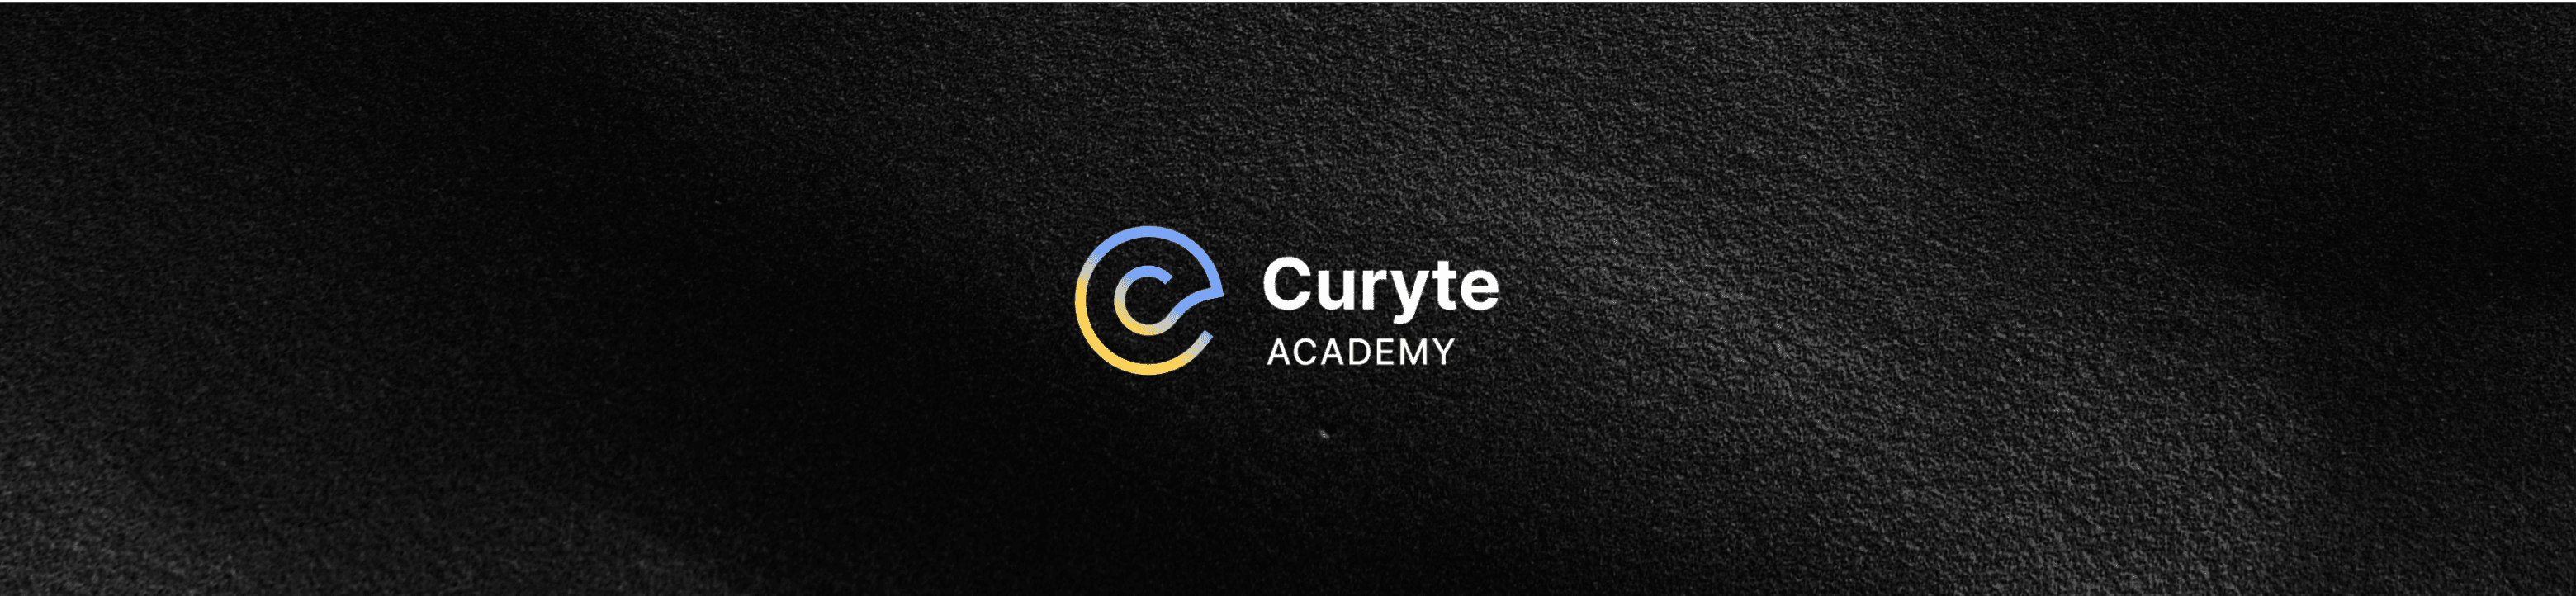 Cover Image for What Is Curyte?